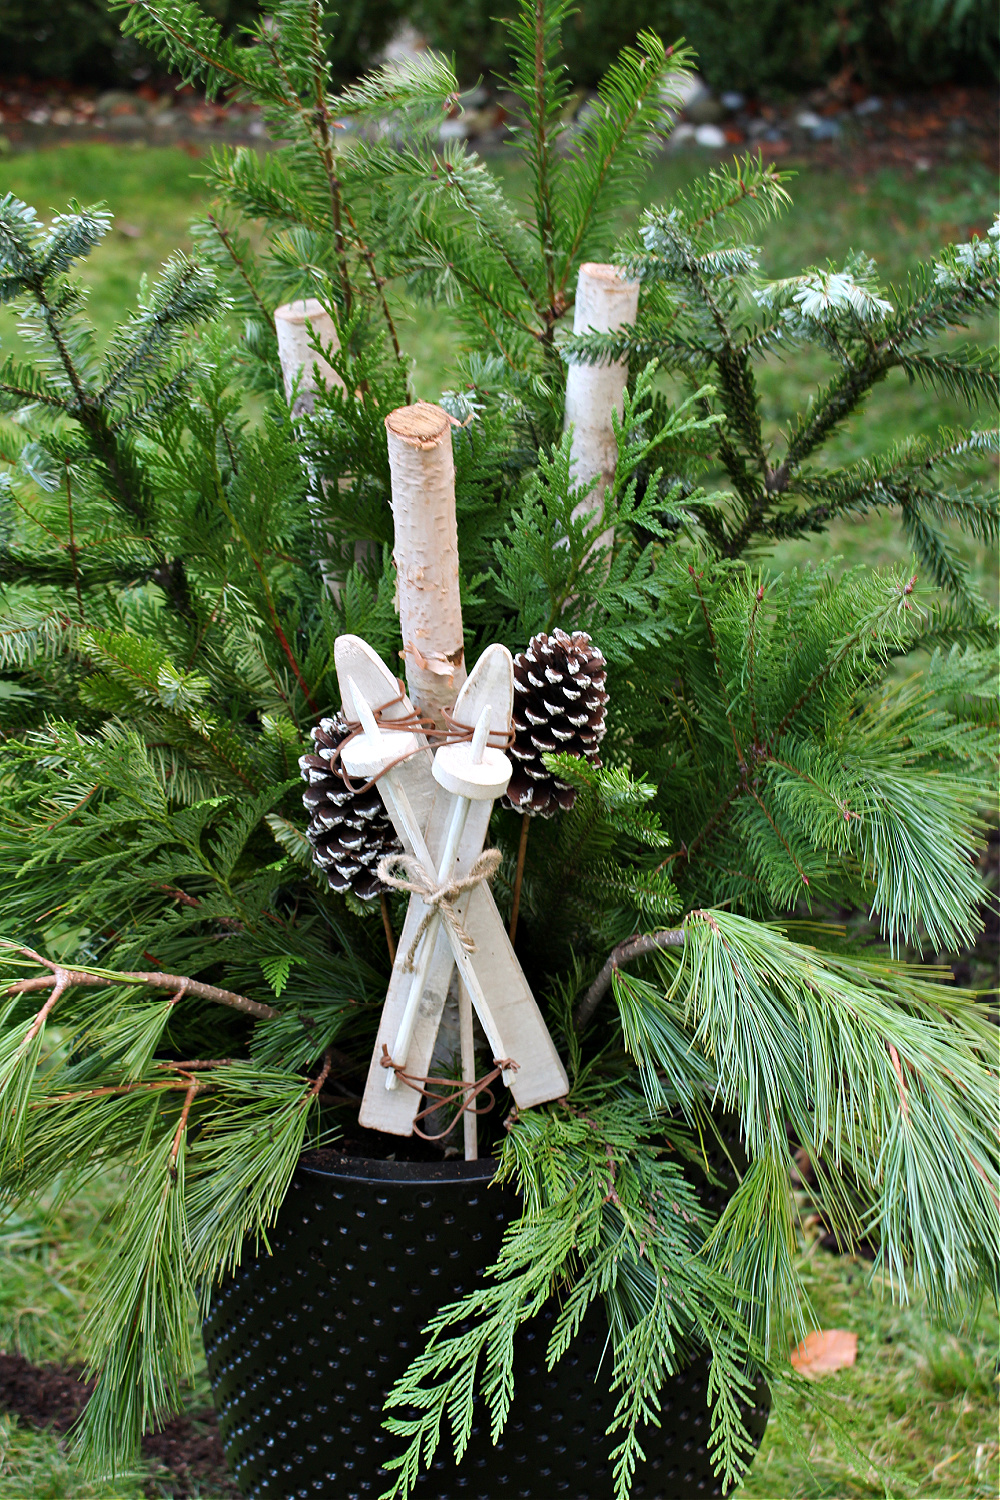 Outdoor Christmas planter with fresh greenery, wood skis, and pine cones.